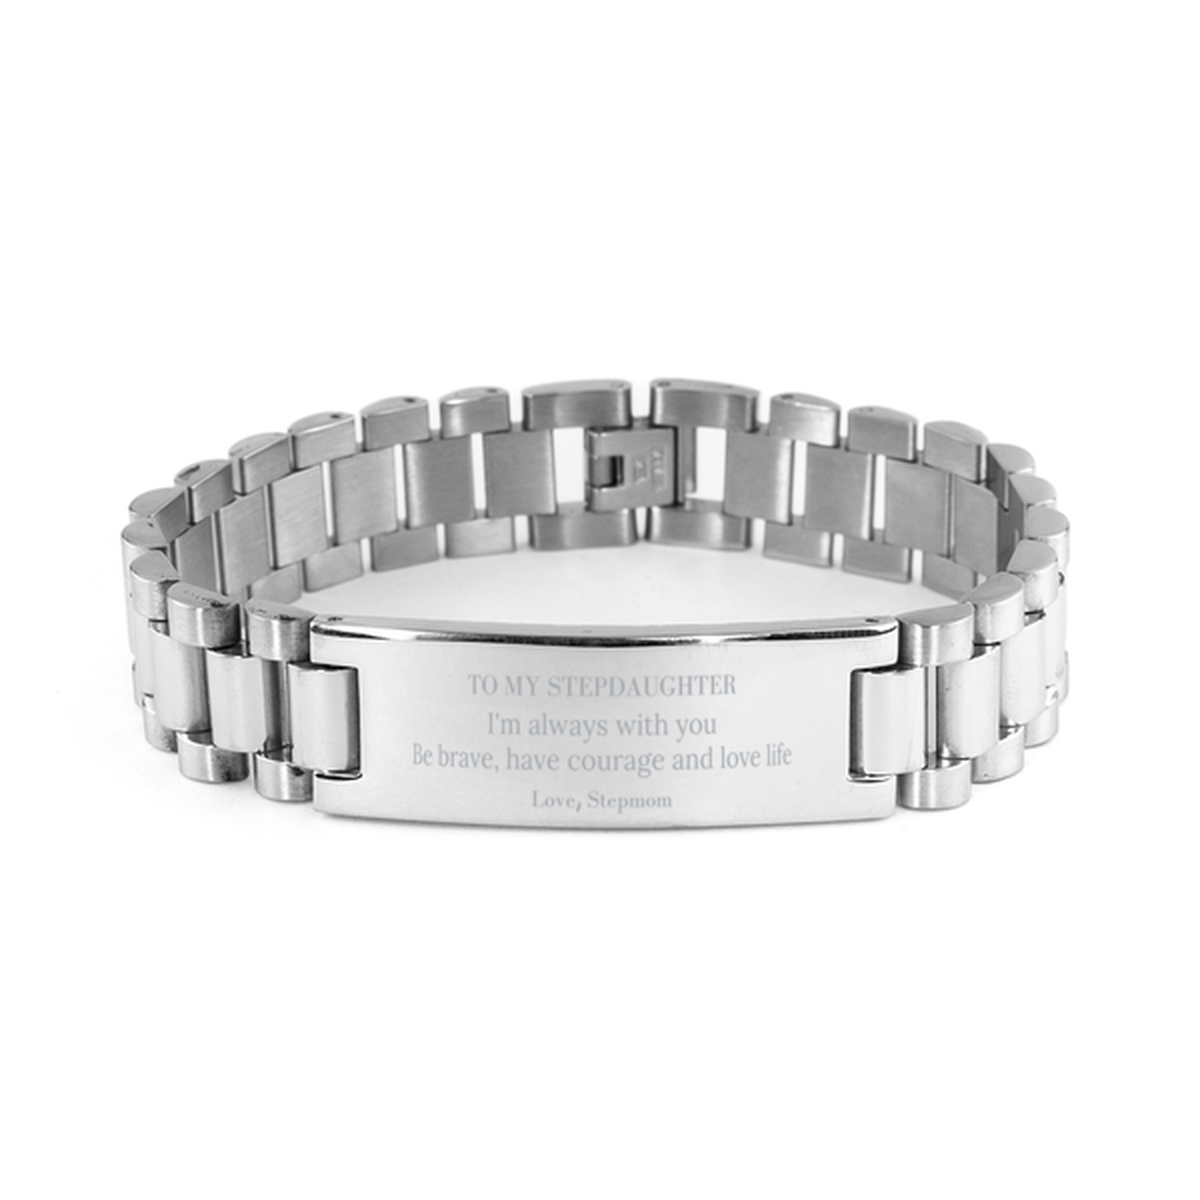 To My Stepdaughter Gifts from Stepmom, Unique Ladder Stainless Steel Bracelet Inspirational Christmas Birthday Graduation Gifts for Stepdaughter I'm always with you. Be brave, have courage and love life. Love, Stepmom